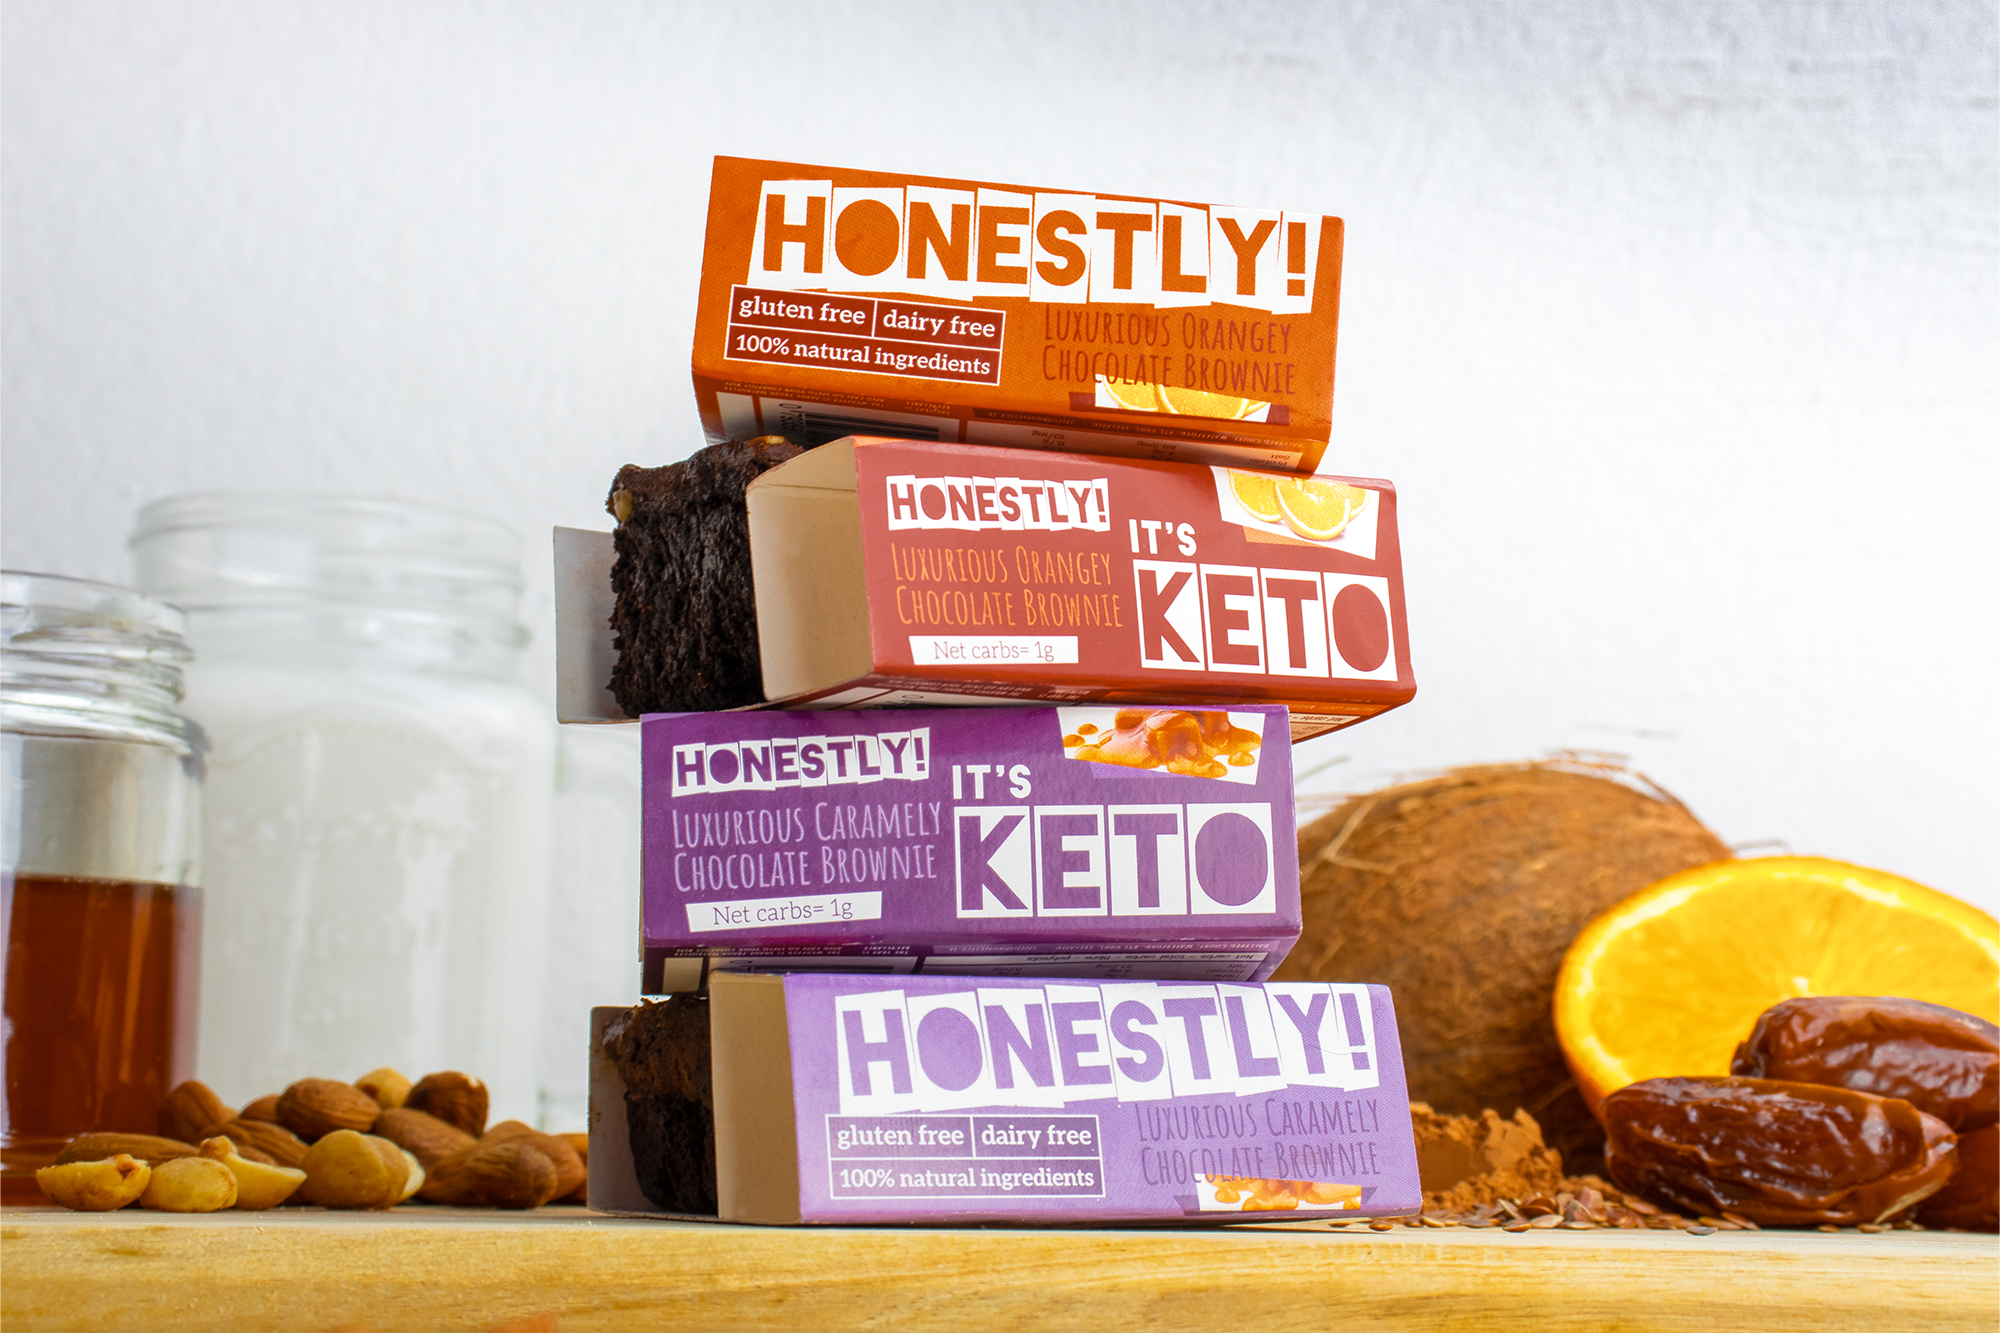 Cover image: Name, branding and packaging for Honestly!